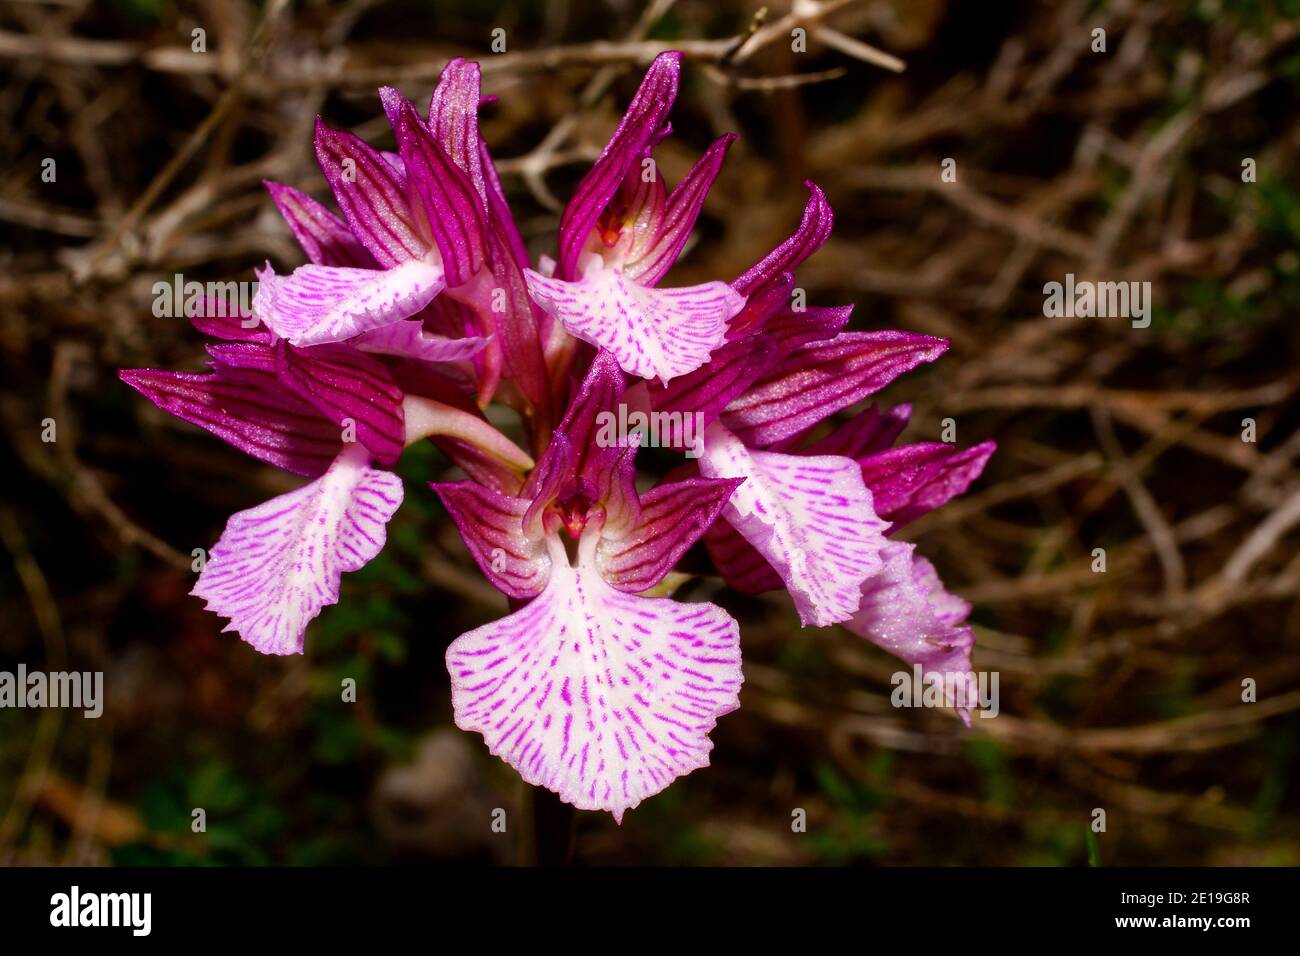 Purple and white flower of Orchis papilionacea, the butterfly orchid, on Crete in Greece, frontal view with natural background Stock Photo